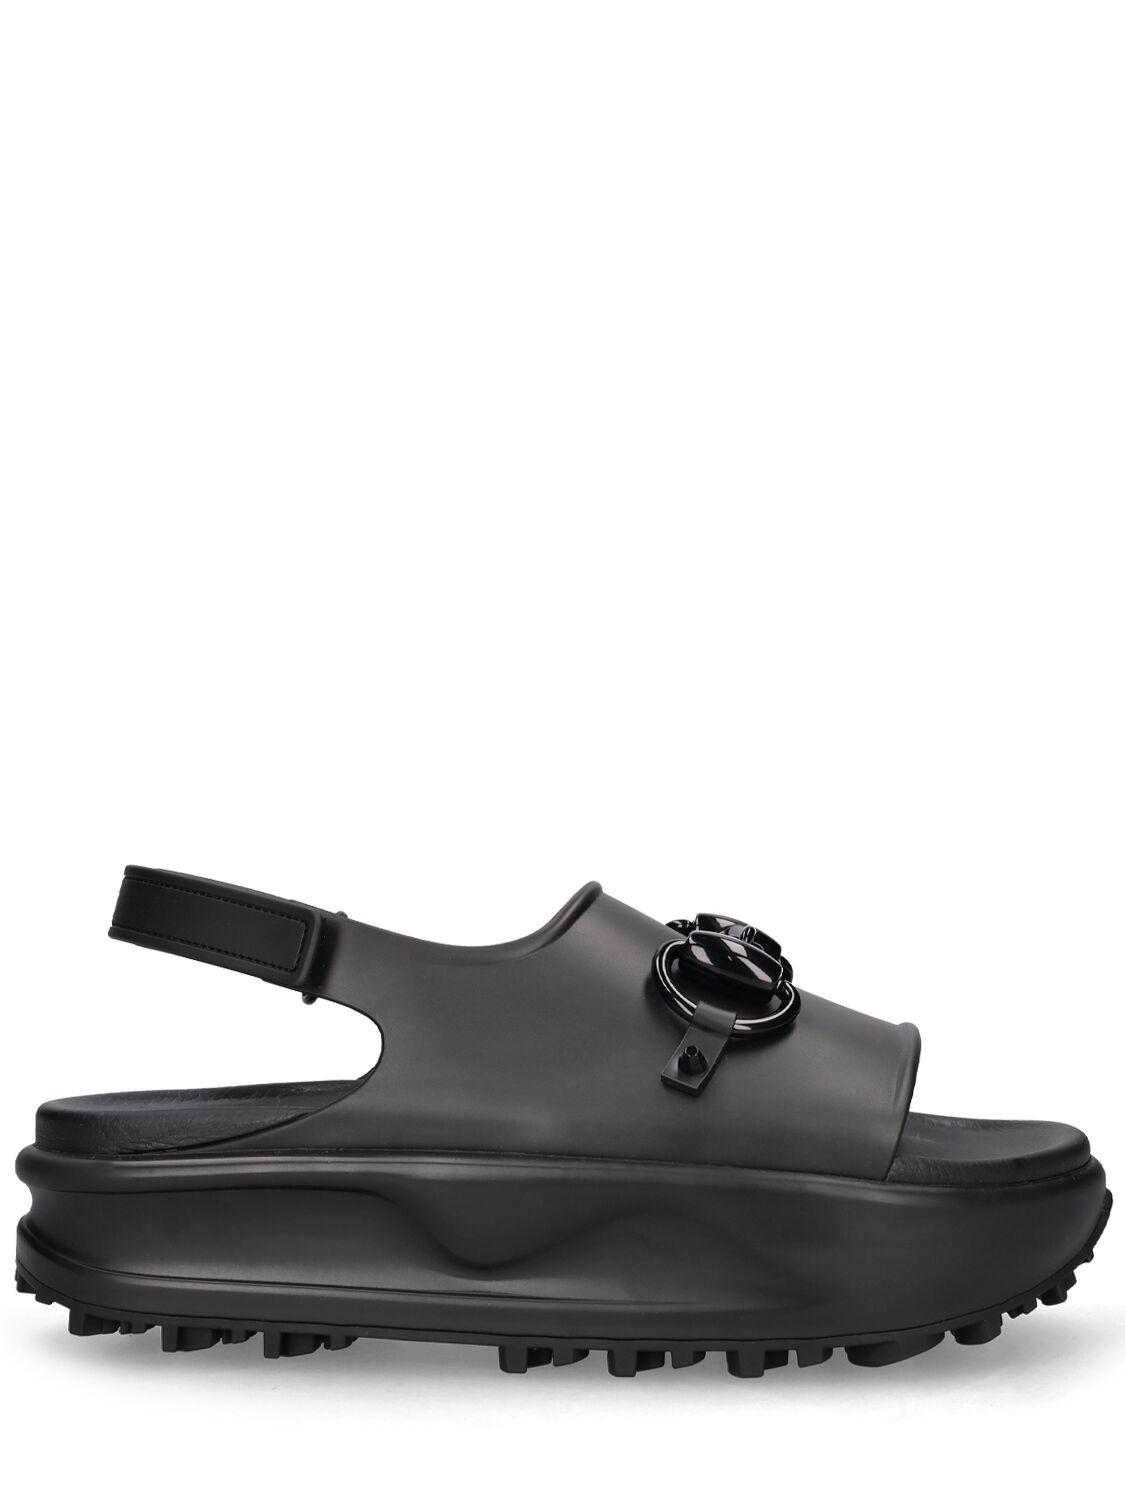 Gucci 25mm New Miami Rubber Wedge Sandals in Black | Lyst Canada